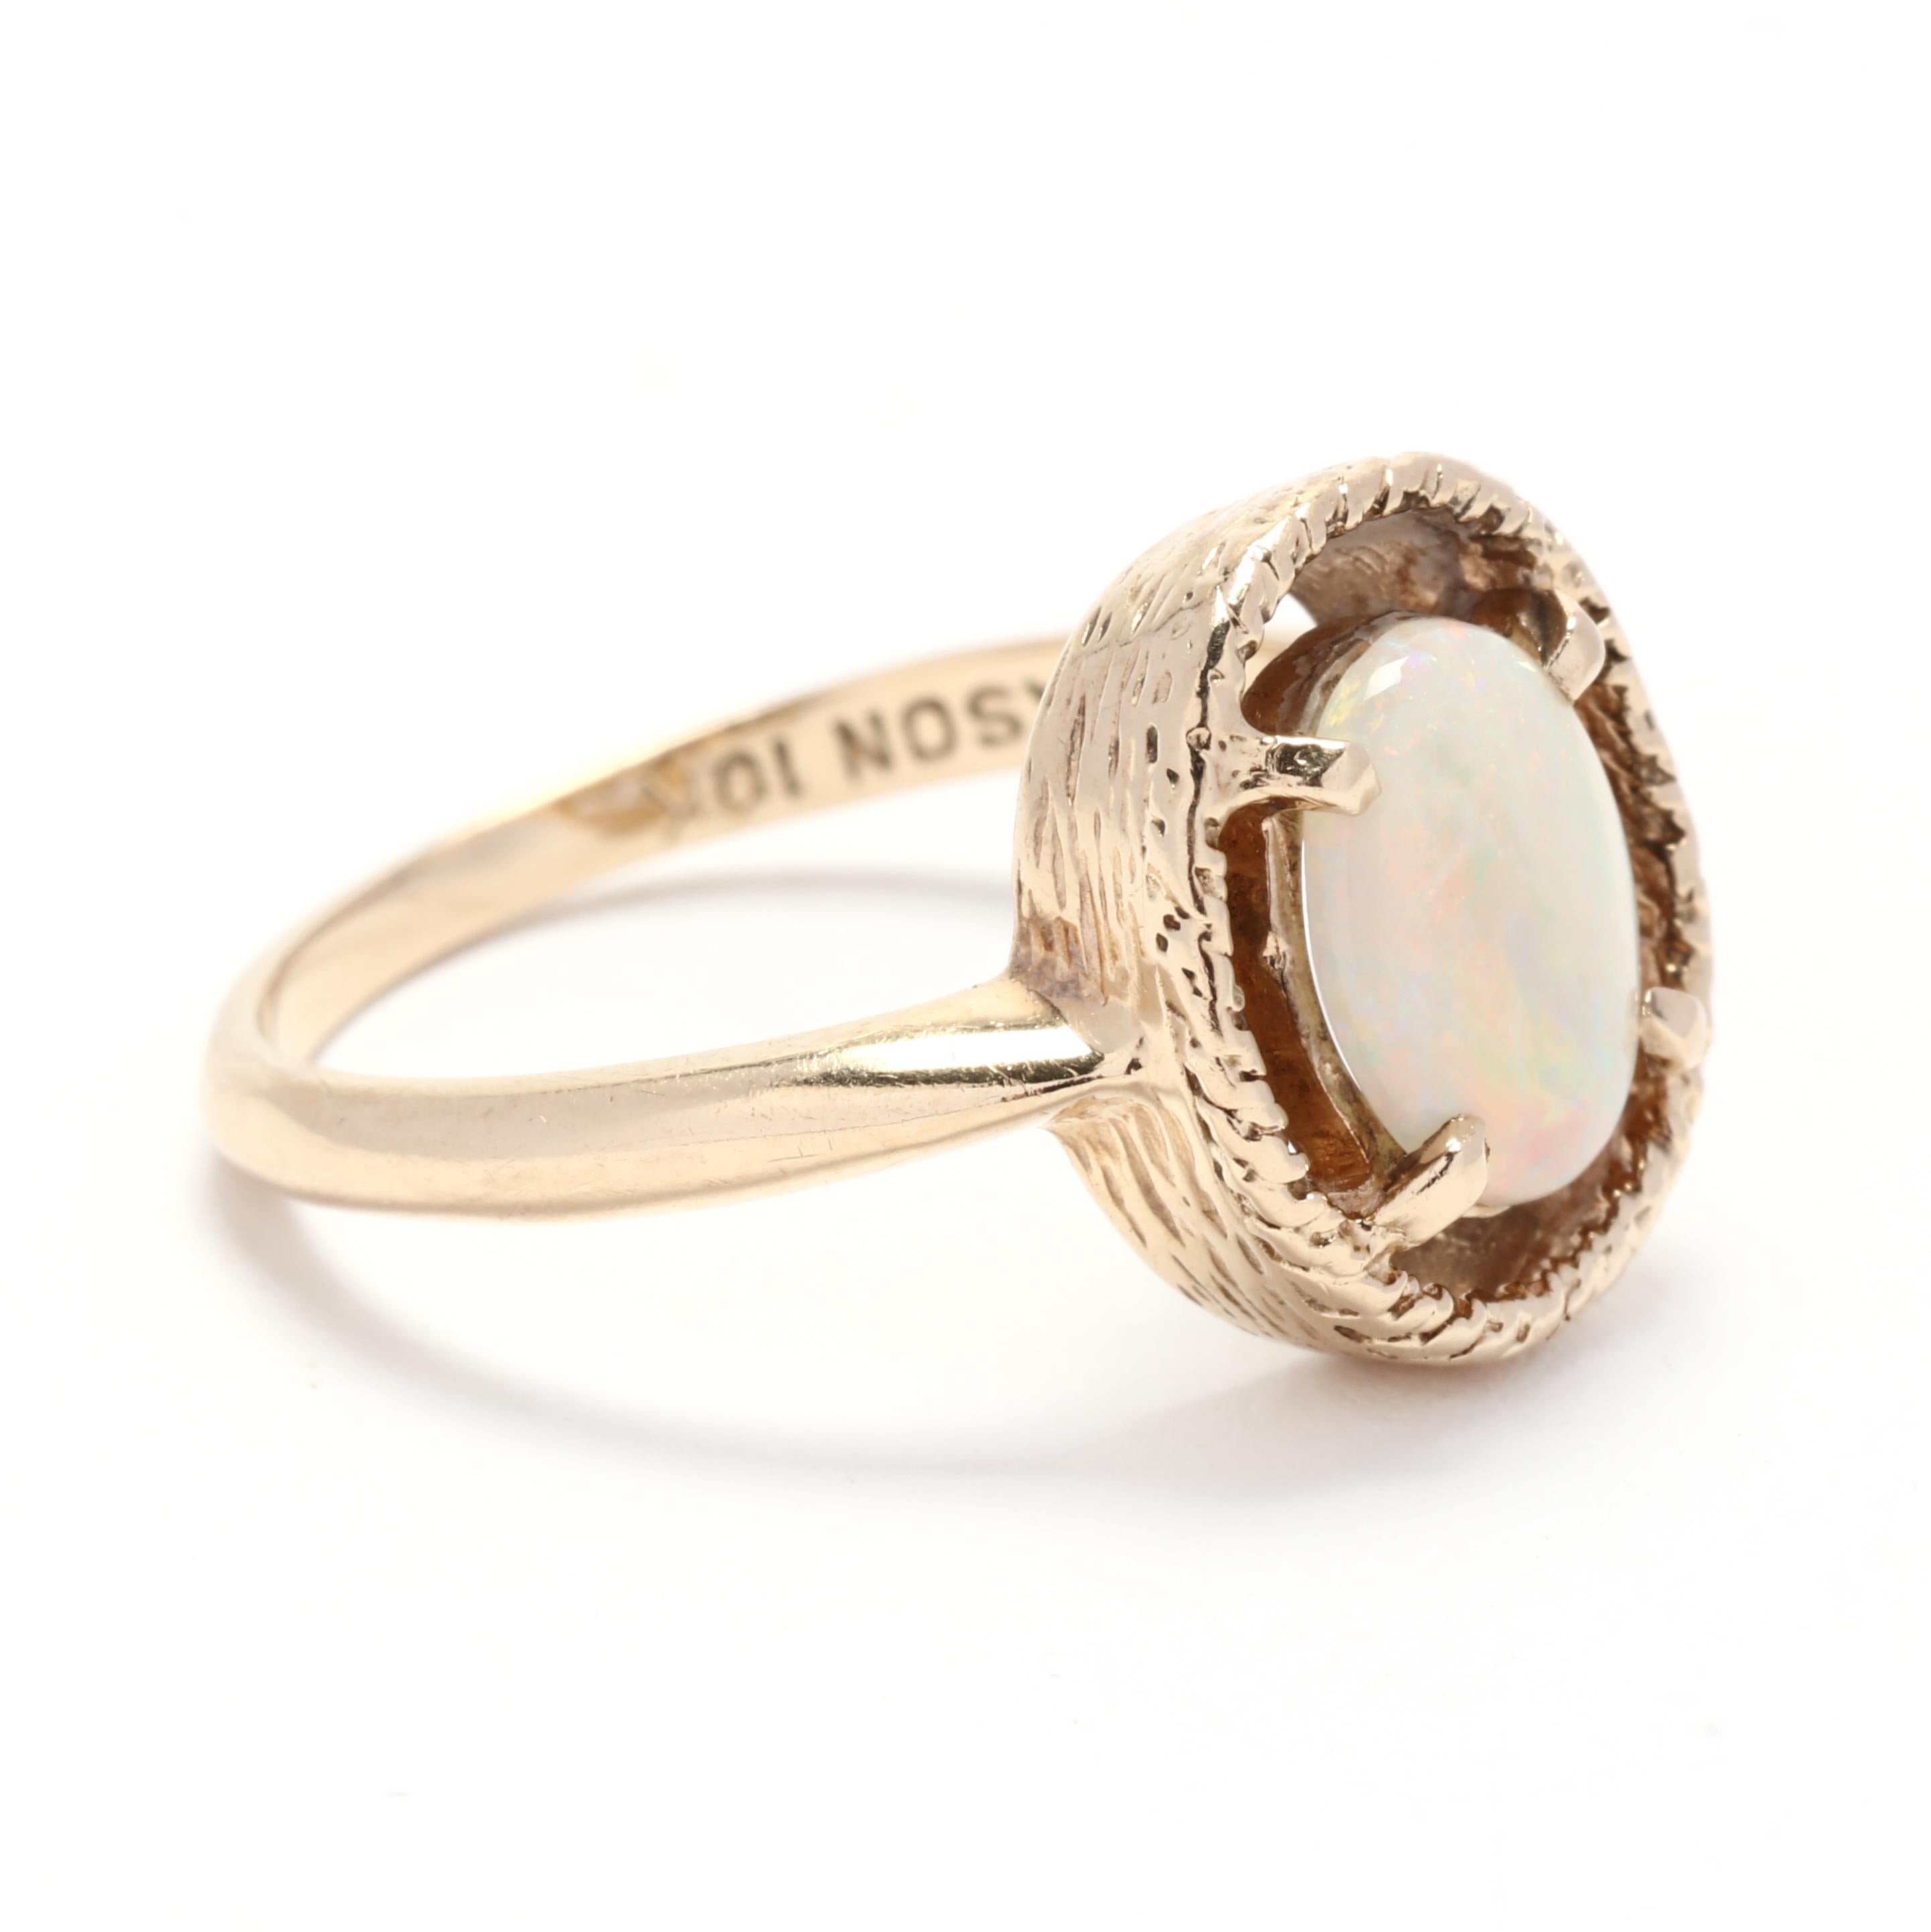 This vintage 1.10ct oval opal gold ring is a breathtaking piece crafted from 10k yellow gold. The oval opal centerpiece displays a stunning rainbow of colors when it catches the light, creating a captivating and mesmerizing effect. The ring is a